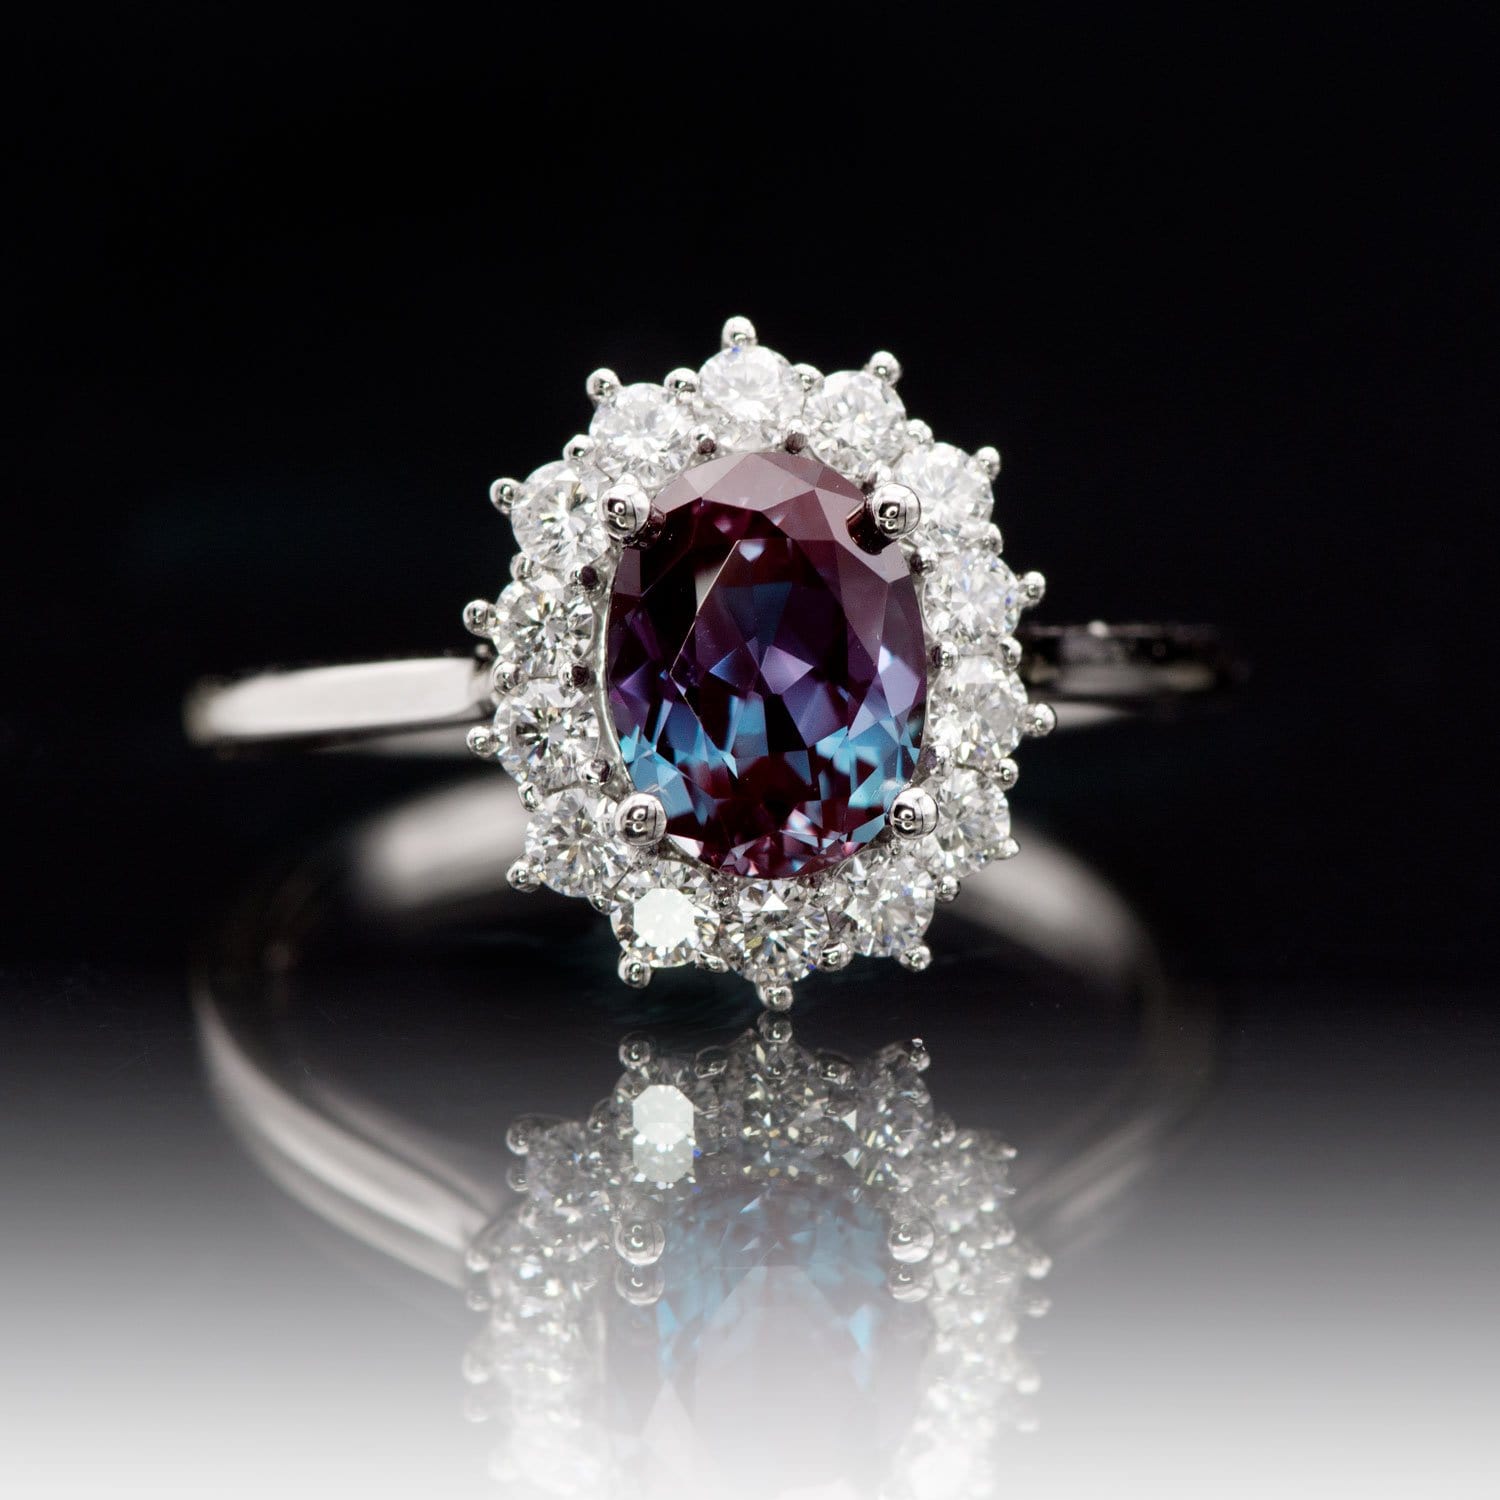 Ophelia - Oval Lab-Created Alexandrite Prong Set Halo Engagement Ring Ring by Nodeform